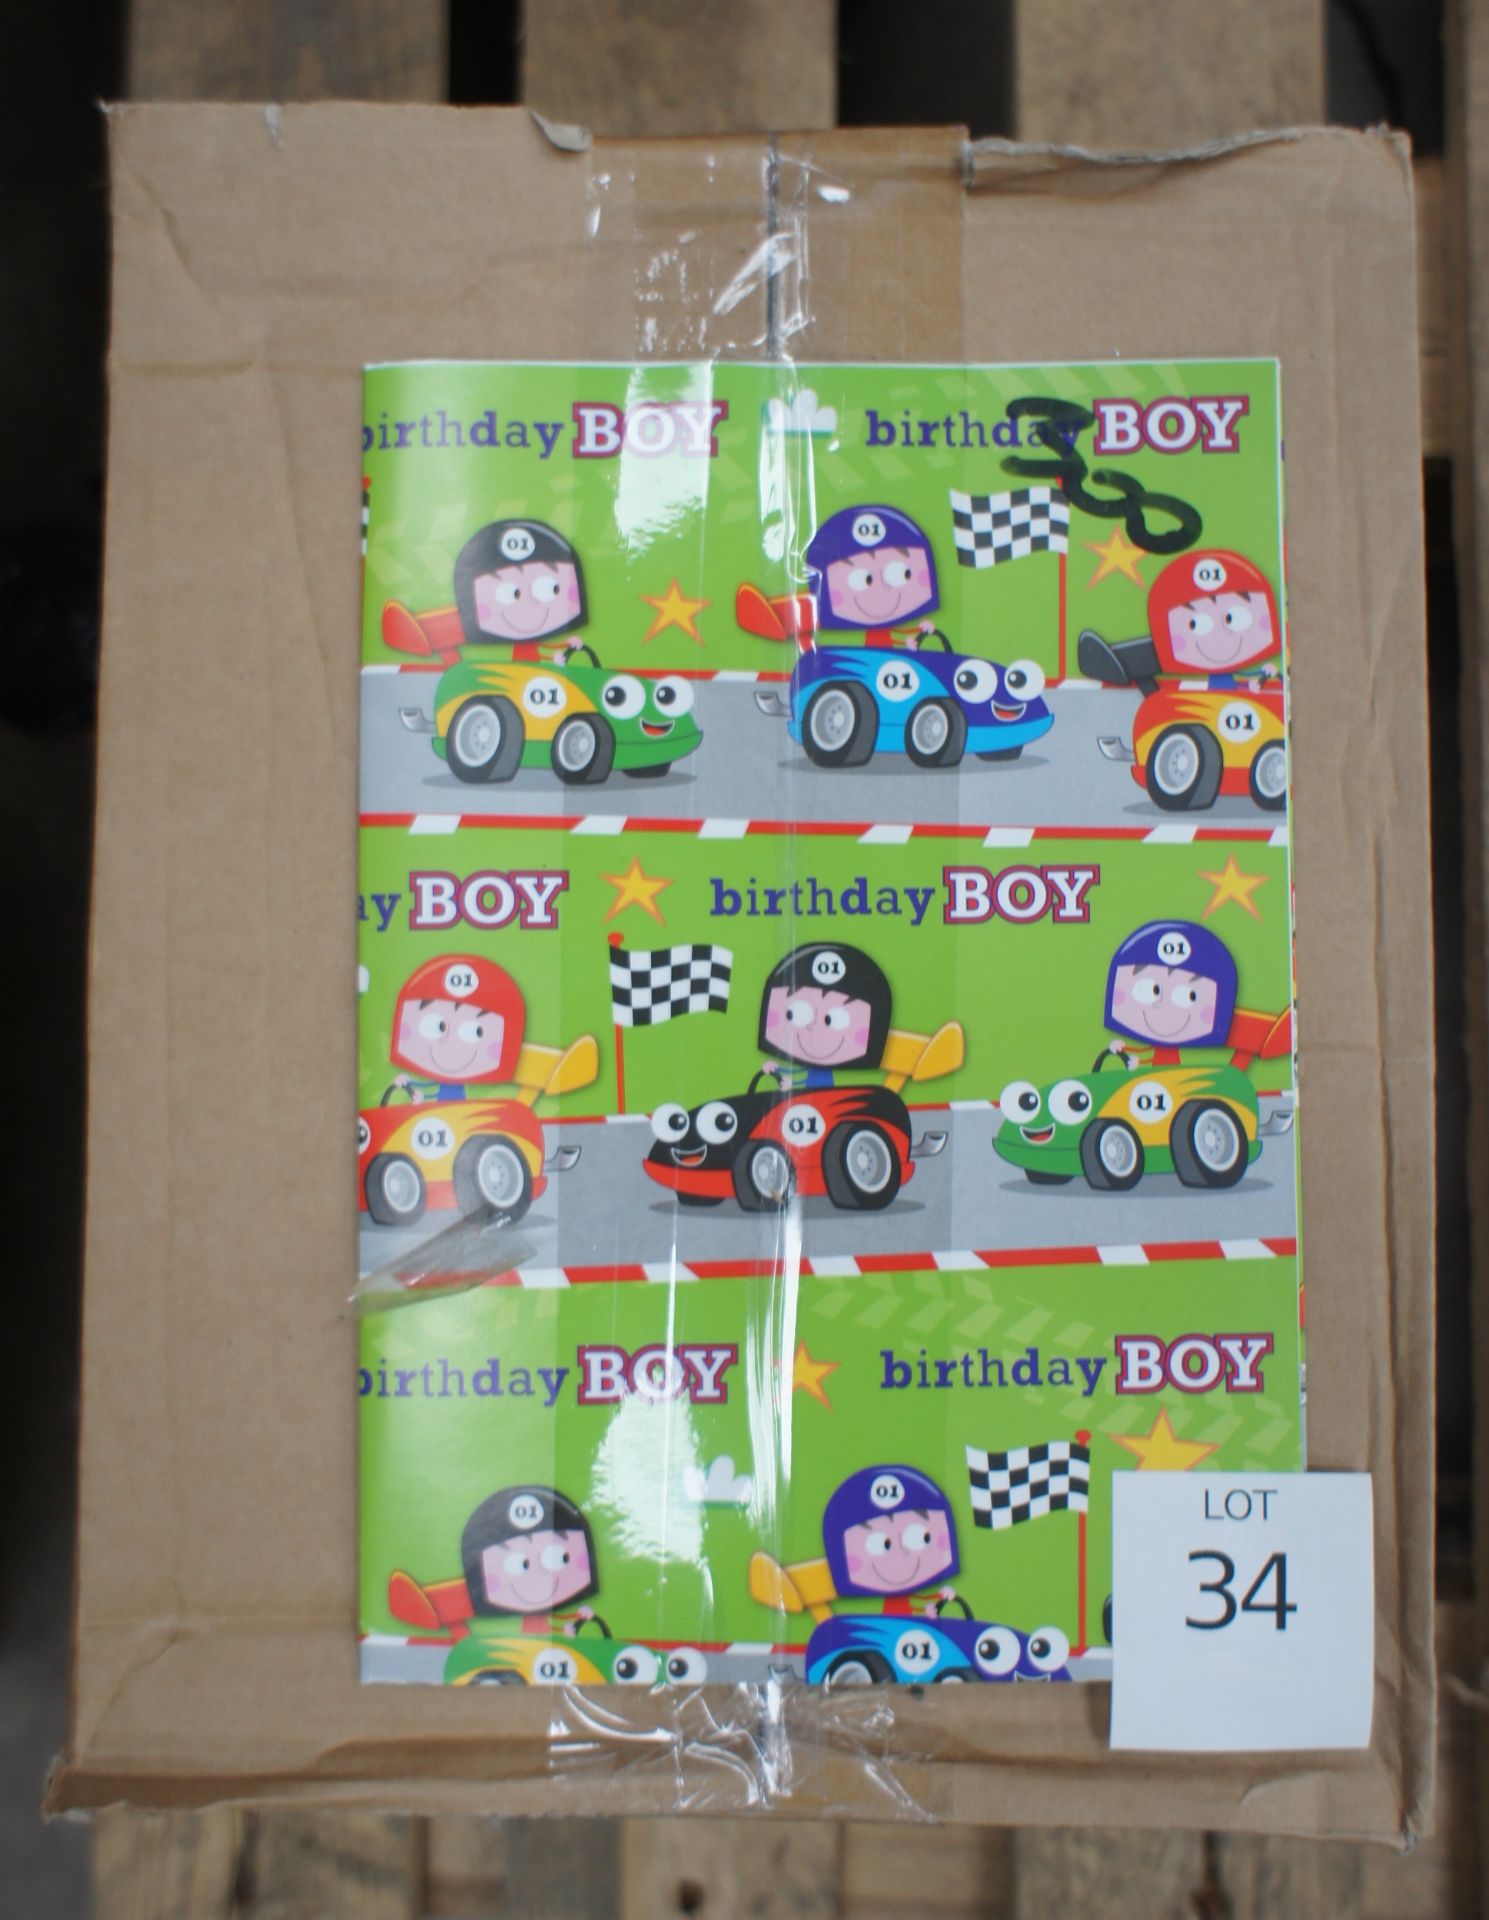 Quantity of Birthday Boy Wrapping Paper to Box